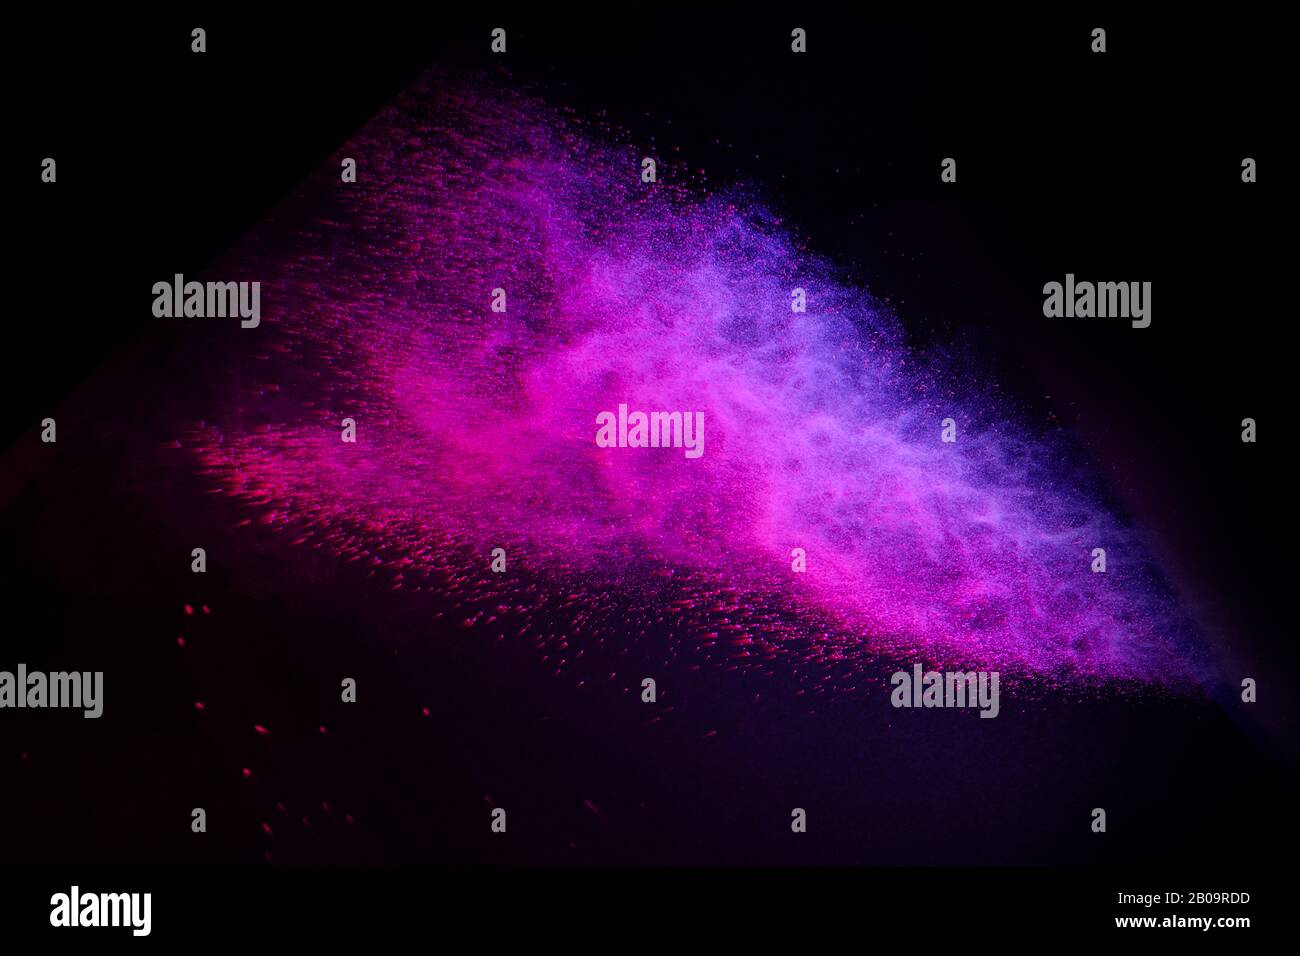 Abstract Color Splash For Wallpaper Design Colorful Dust Explode Paint Splash On White Background Stock Photo Alamy